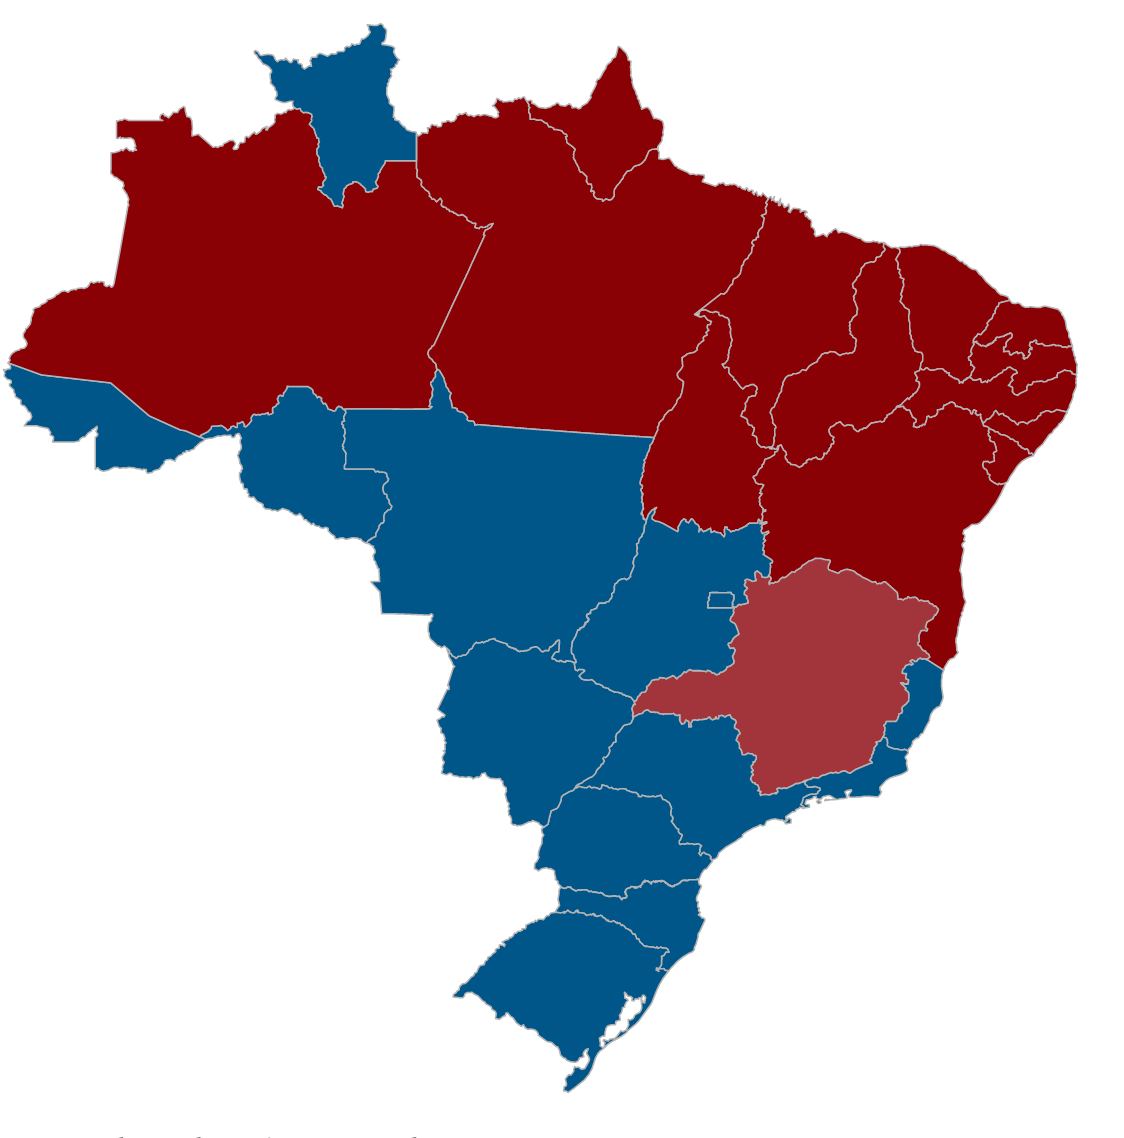 Blue voted for Bolsonaro, red for Lula da Silva. The state in light red is Minas Gerais. 